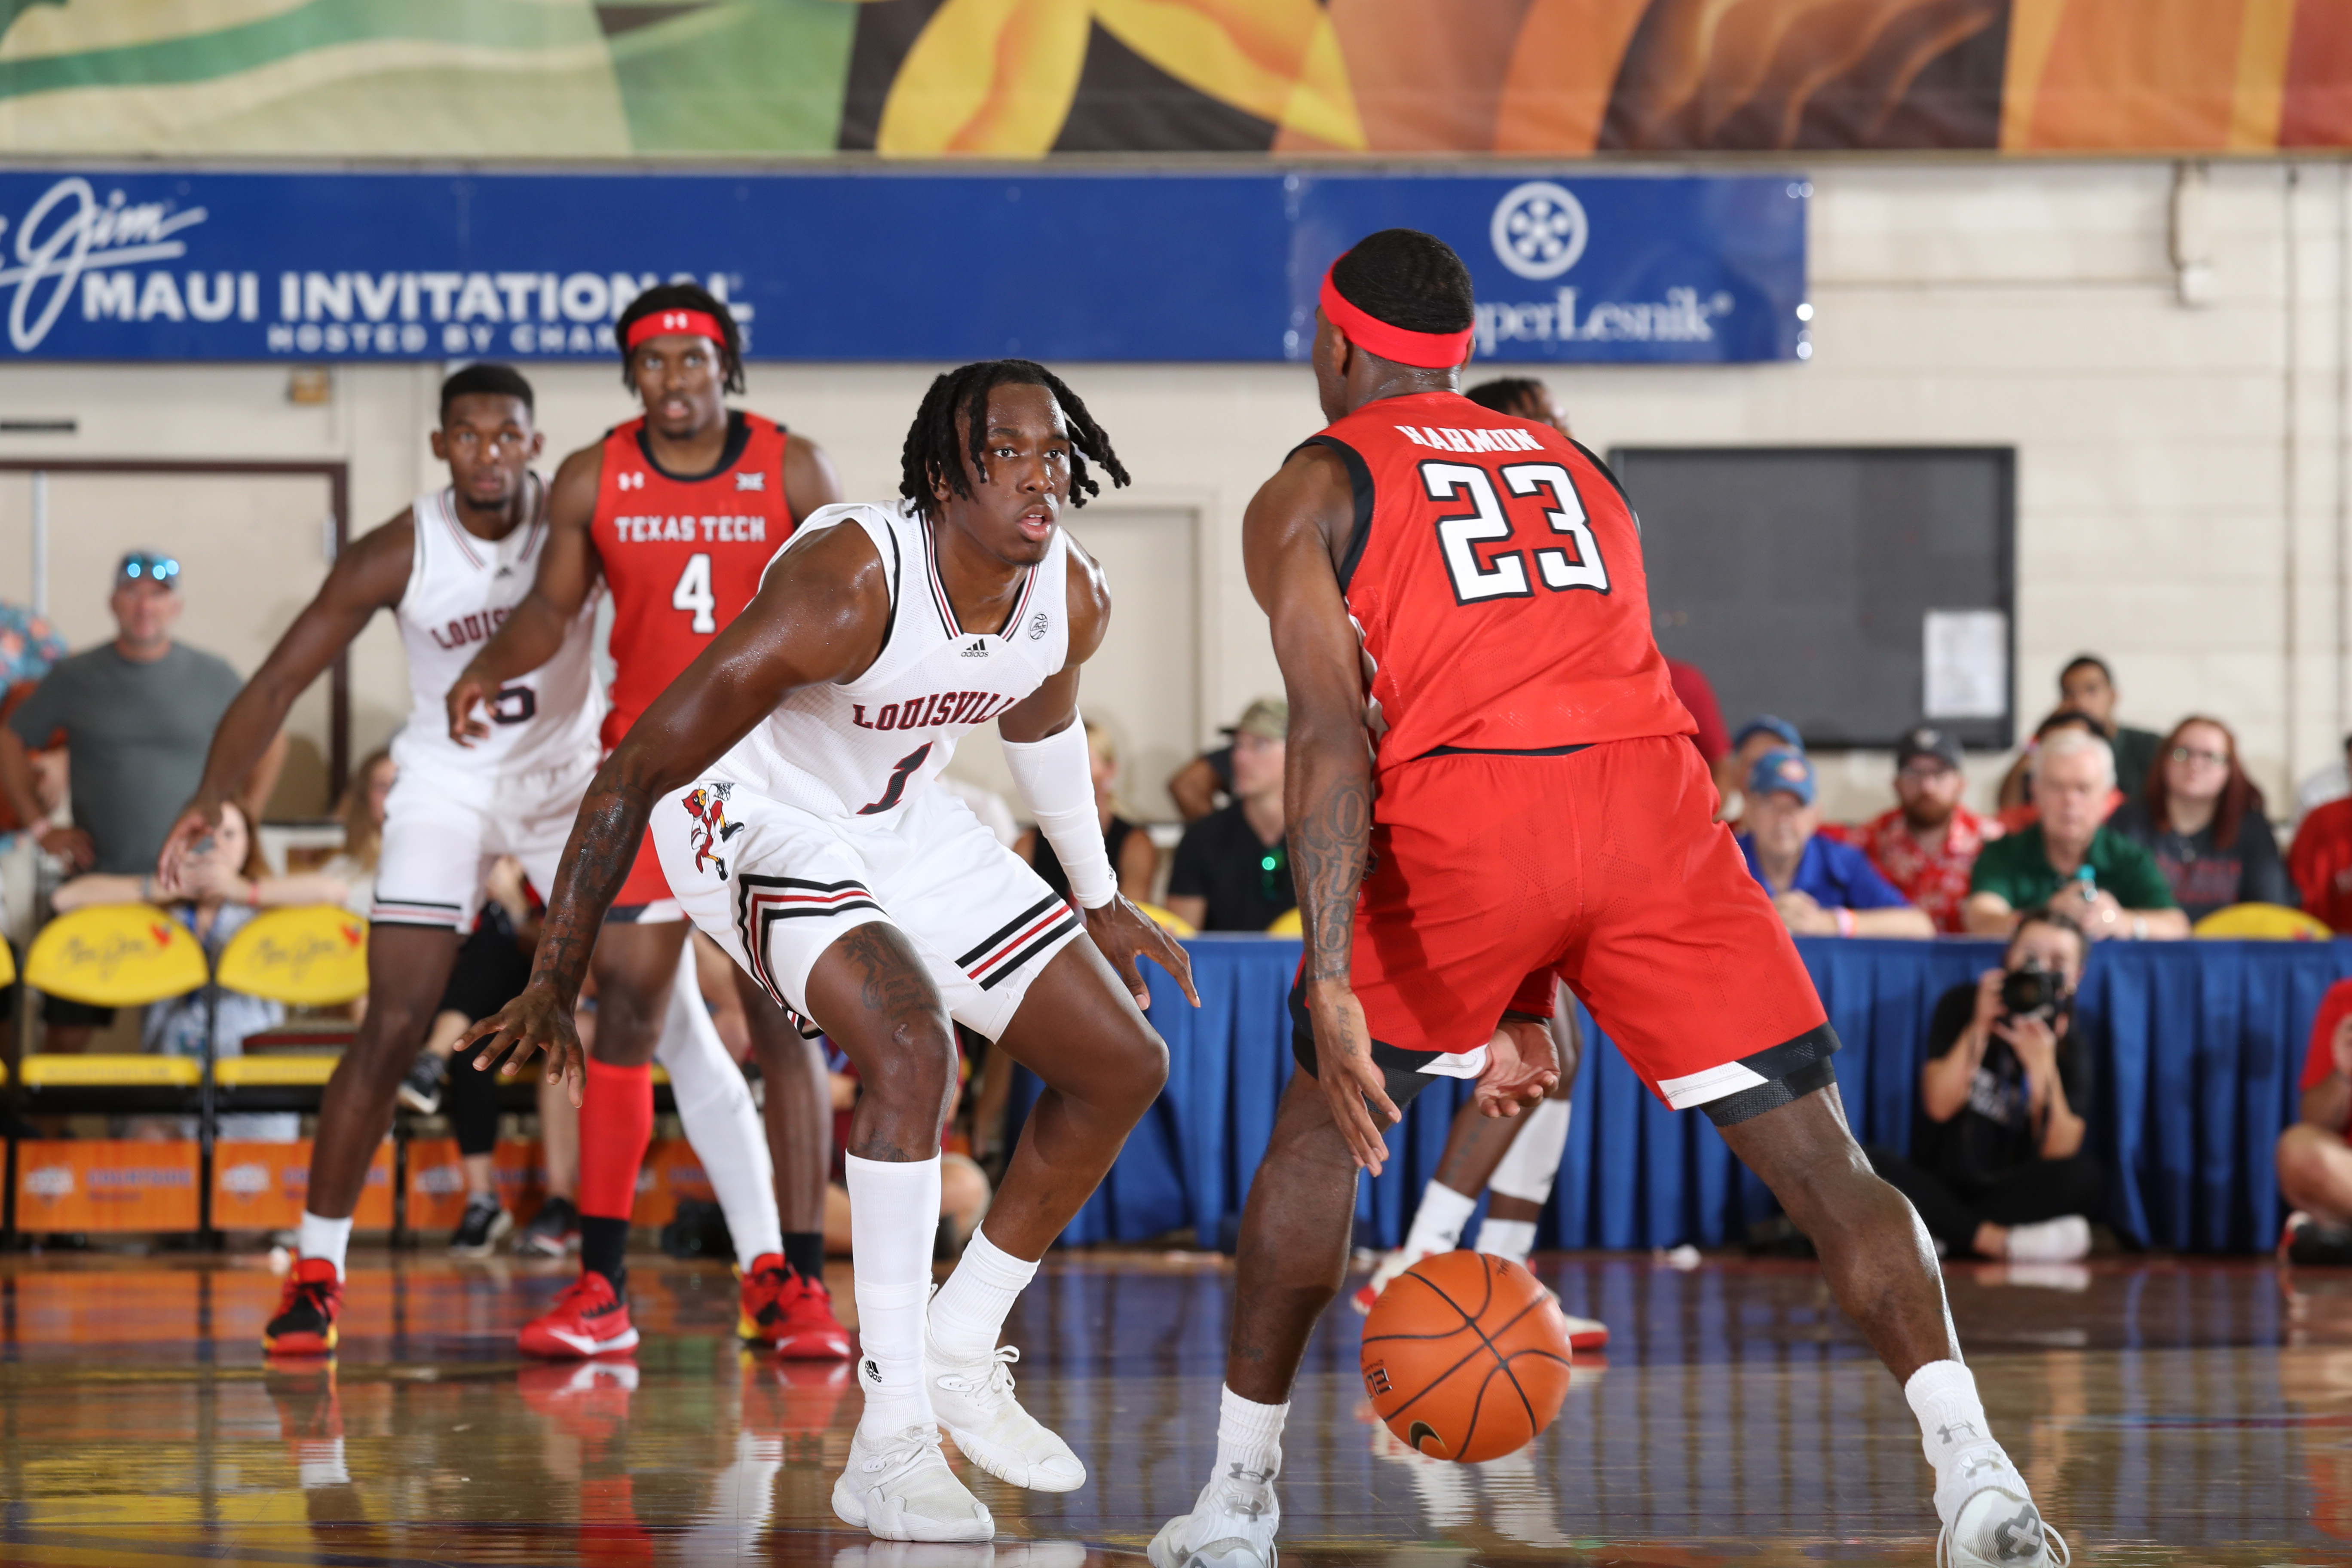 Louisville Annihilated by No. 21 Texas Tech in Maui Invitational